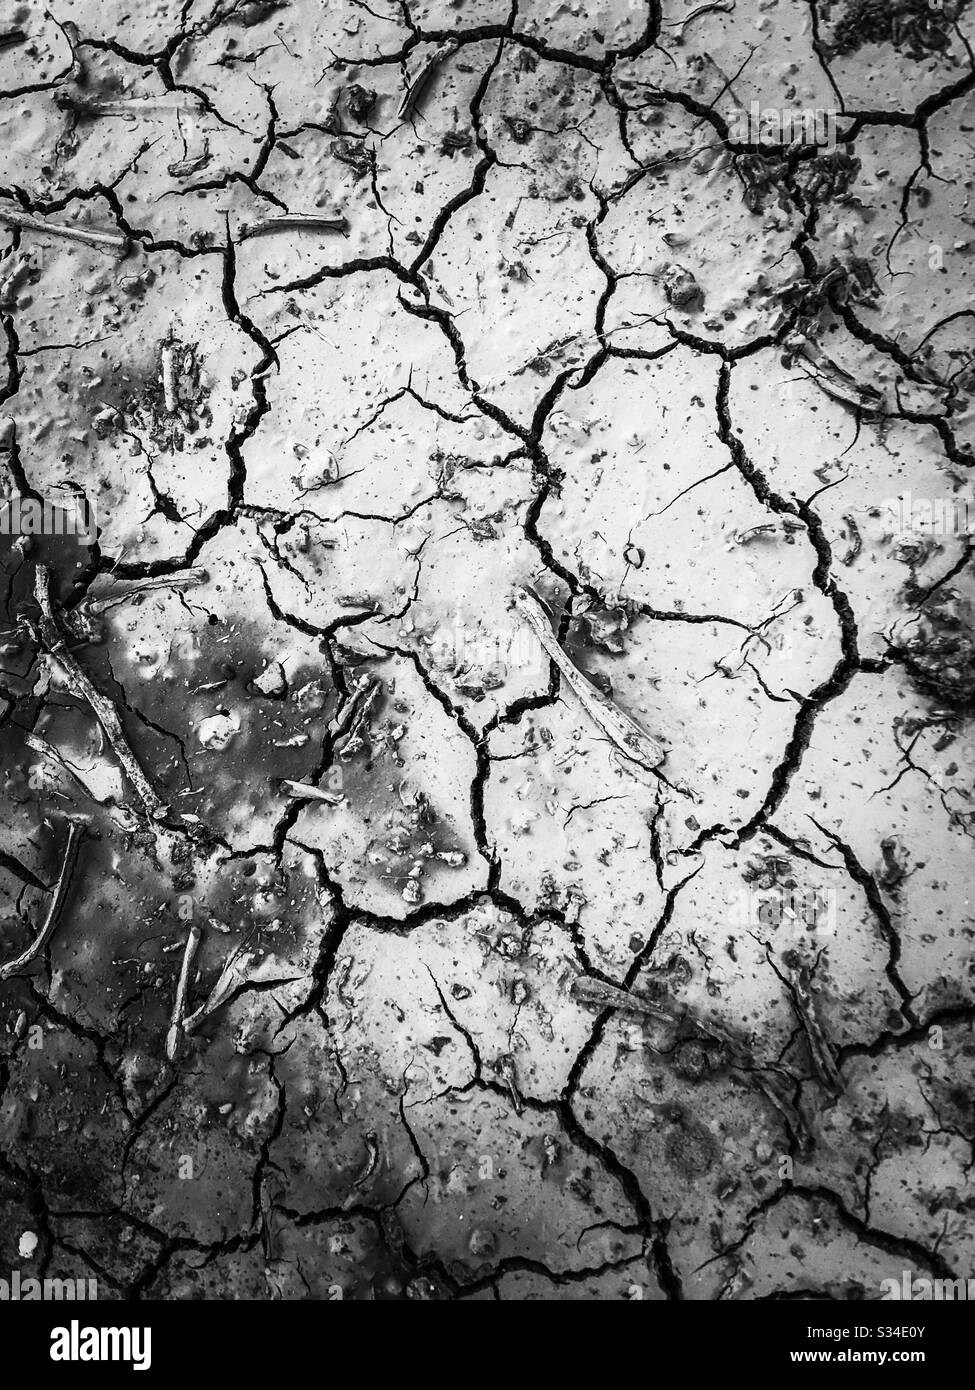 Cracking soil in black and white Stock Photo